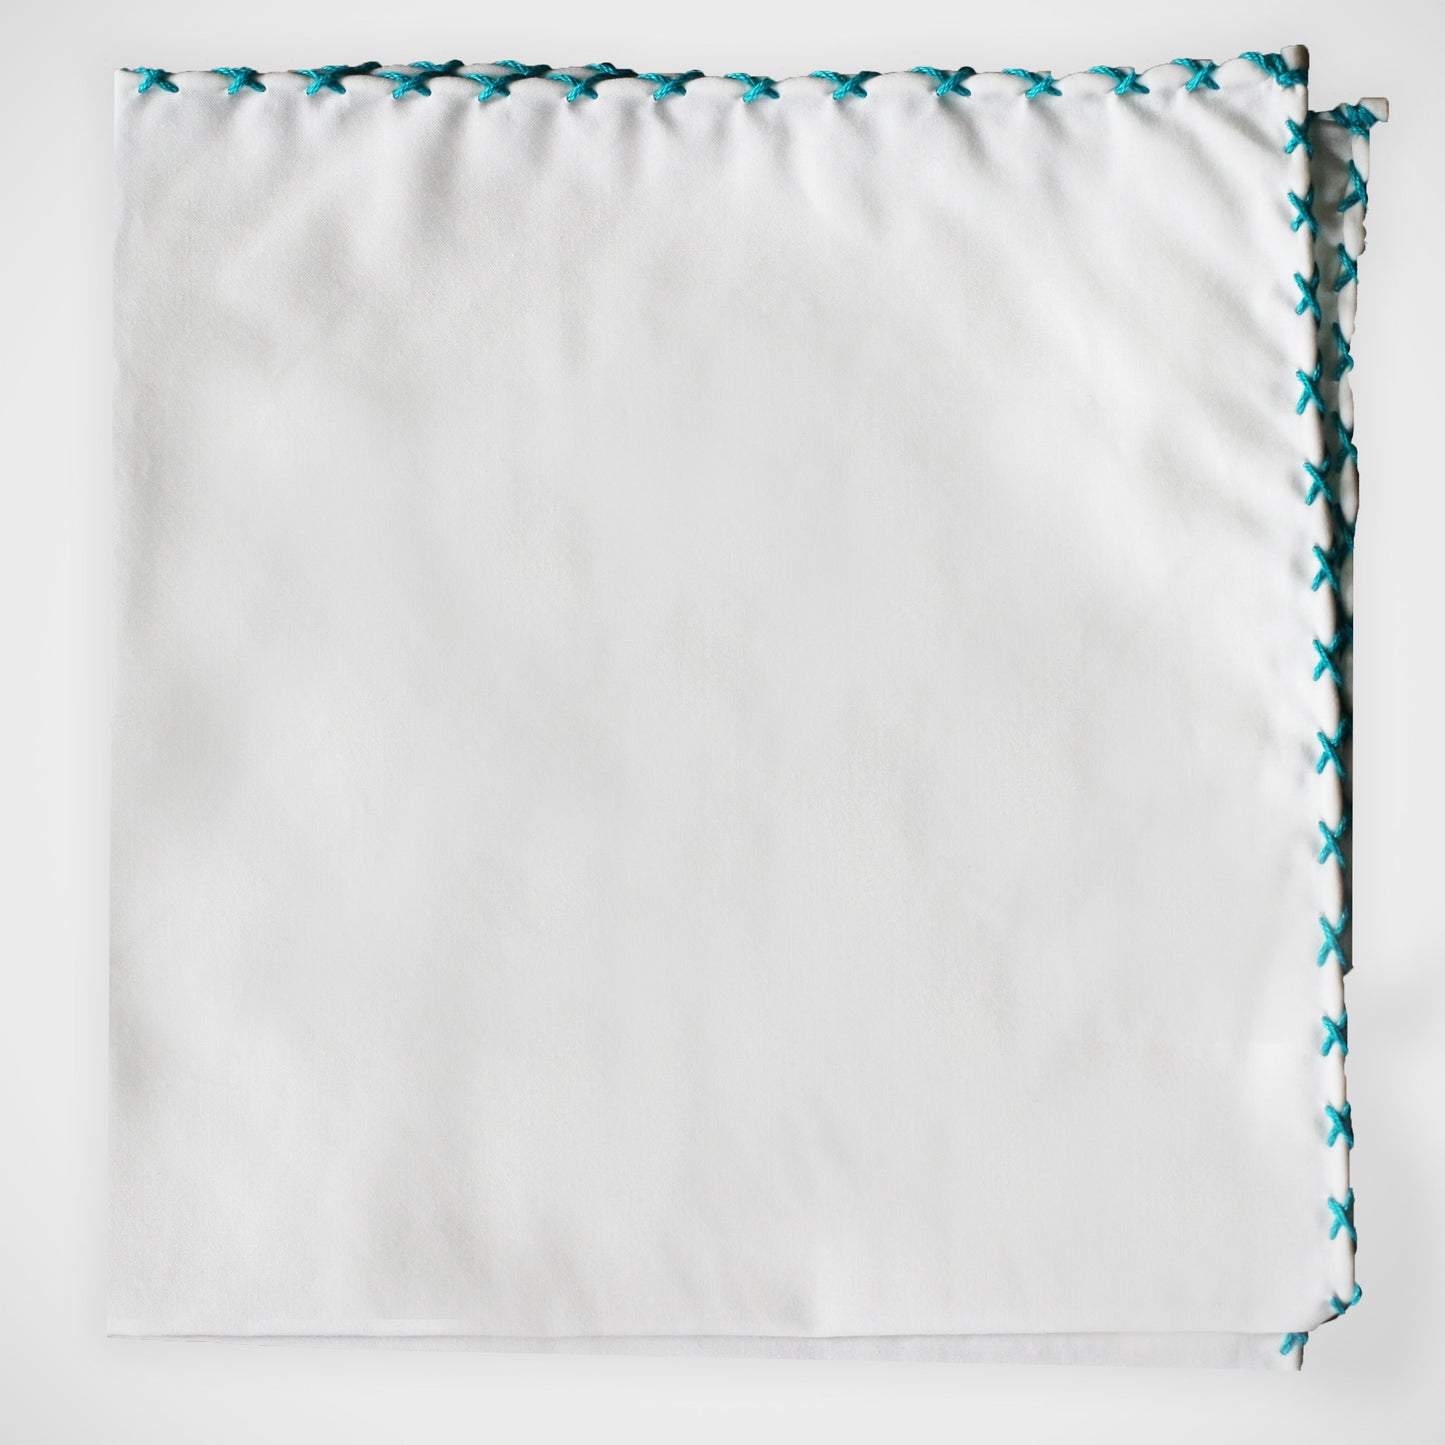 'Hand-stitched in Teal' Pocket Square